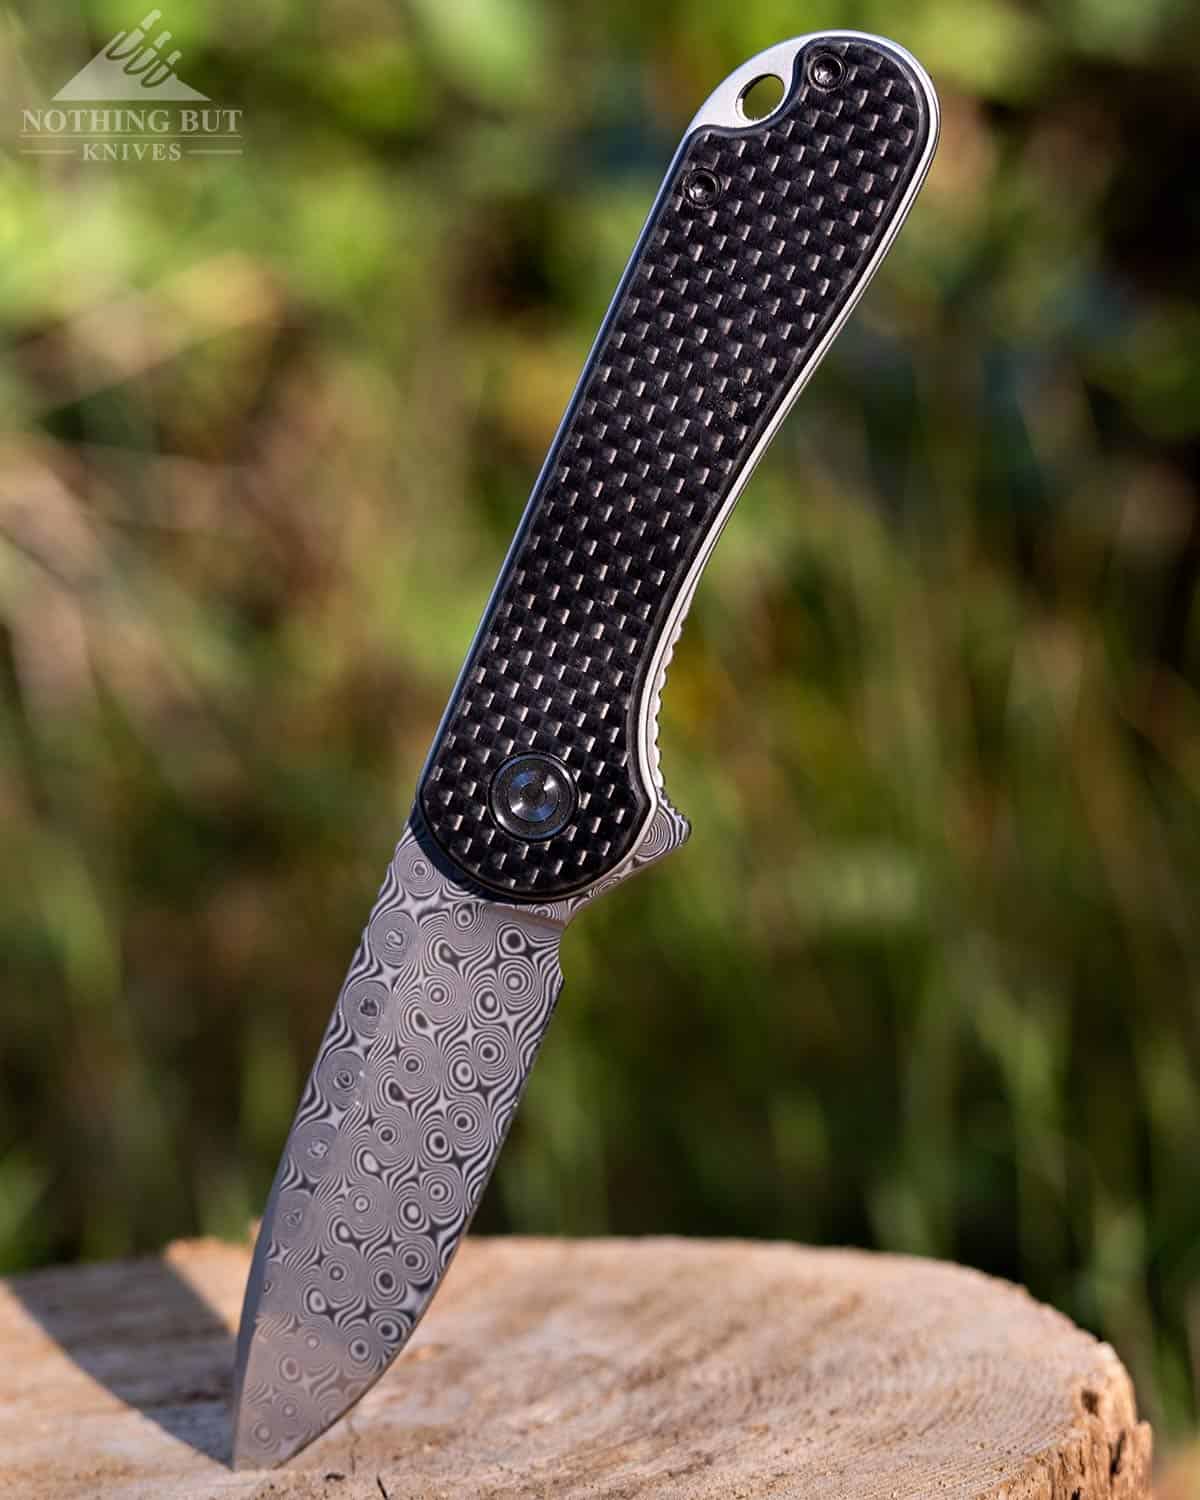 The Civivi Elementum folding knifeing sticking in a stump with the handle up. 